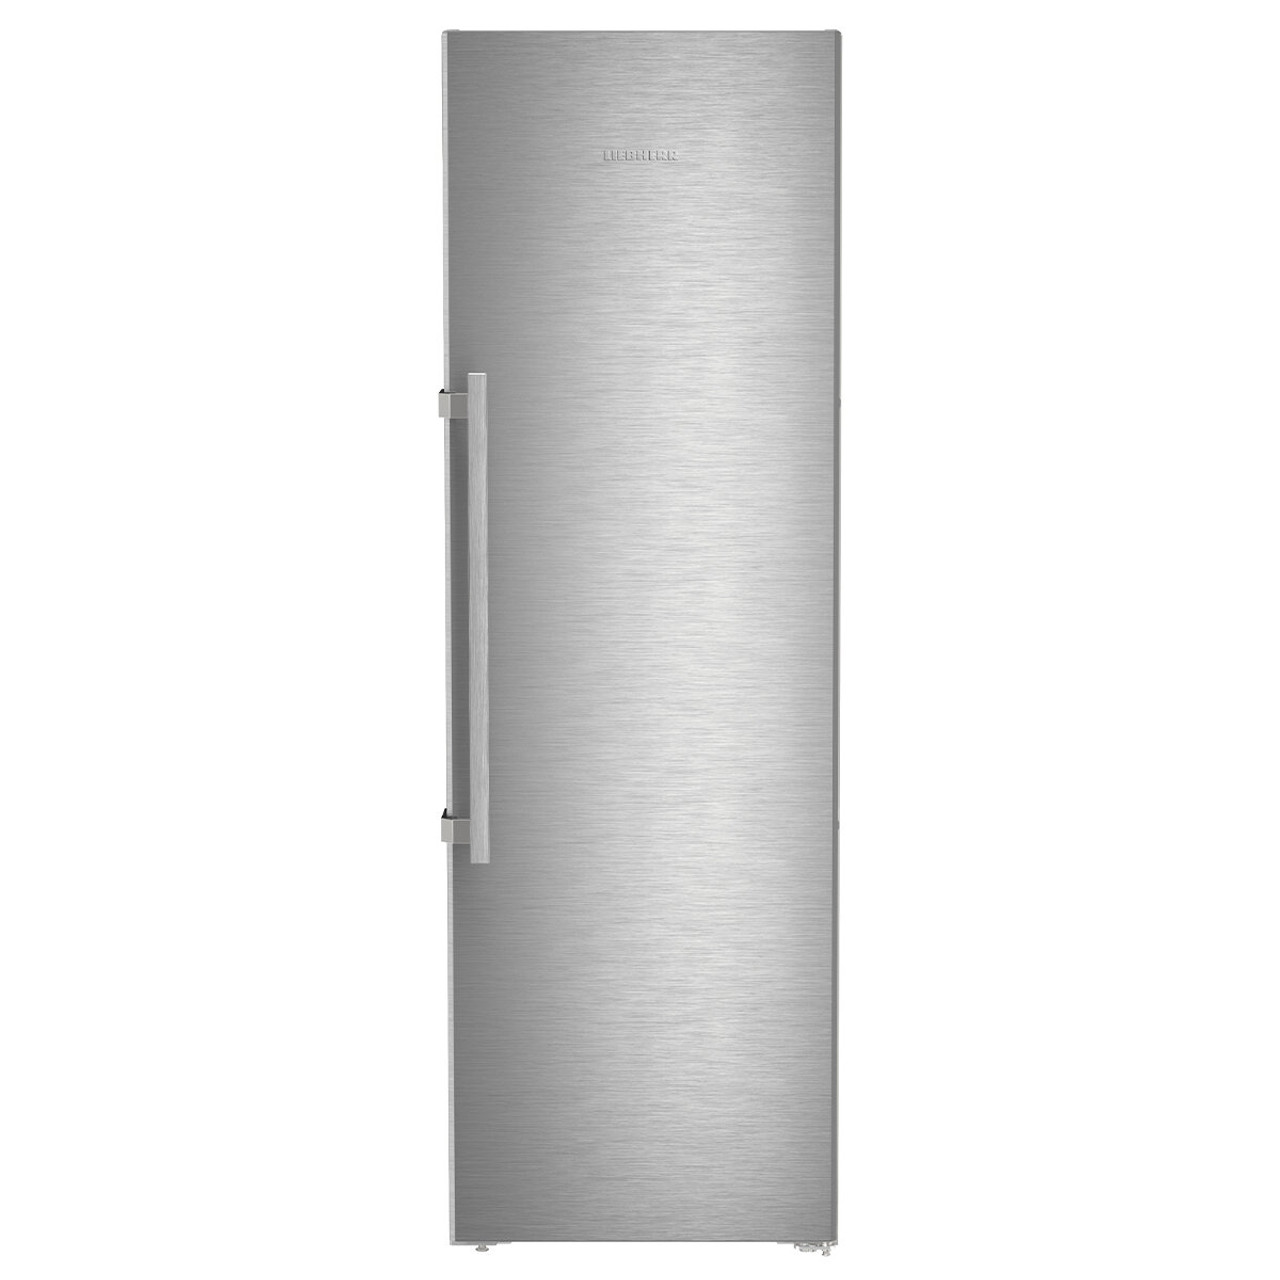 SRSDH5220 - 332L Upright Fridge With Easyfresh And Supercool - Stainless Steel